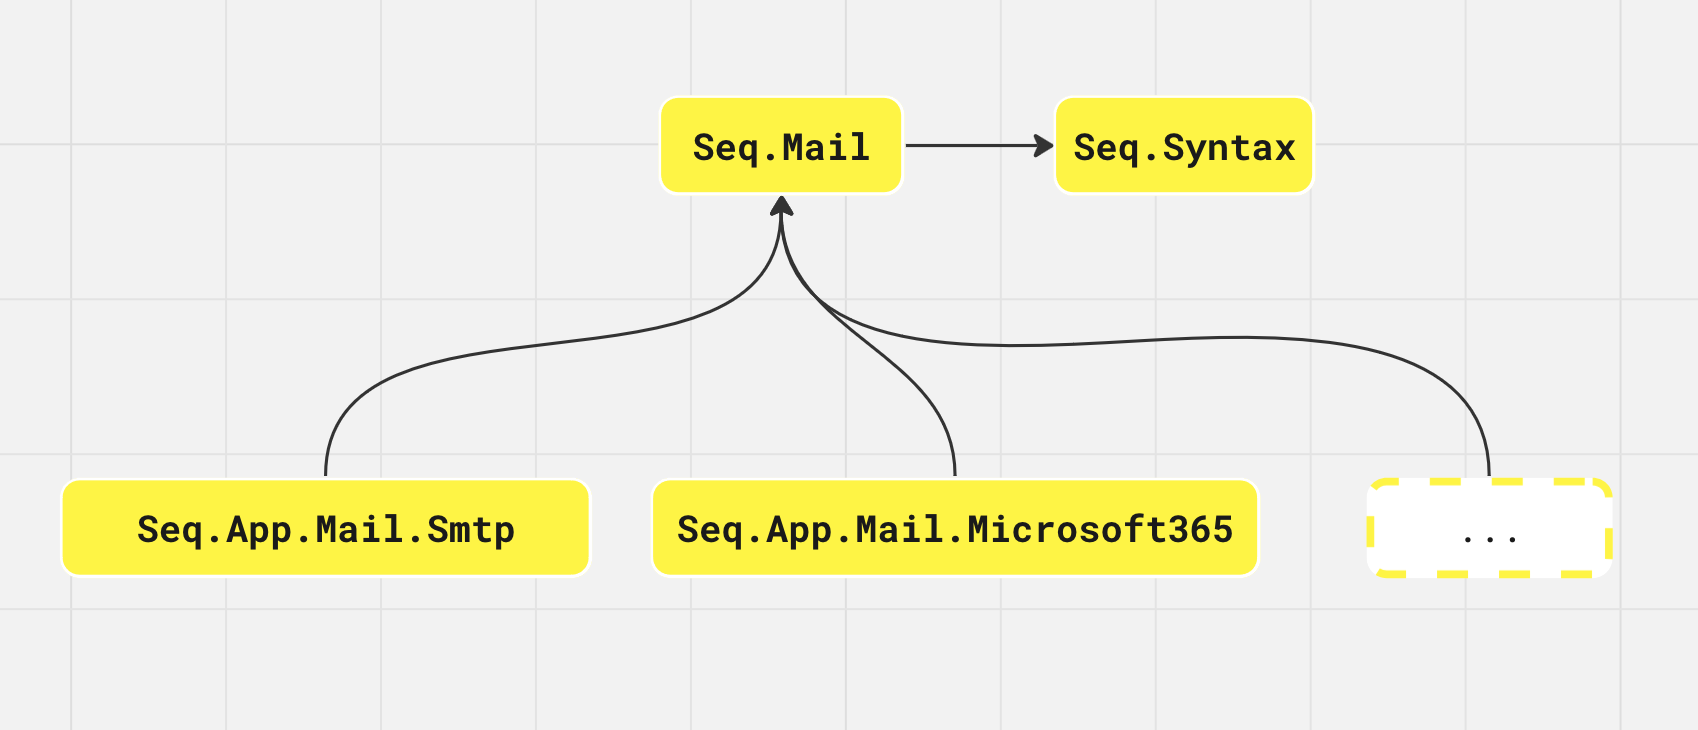 Dependency diagram showing Seq.Mail depending on Seq.Syntax. Three packages are shown depending on Seq.Mail: Seq.App.Mail.Smtp, Seq.App.Mail.Microsoft365, and a box with a horizontal ellipsis, indicating that custom email packages can be implemented in the same way.